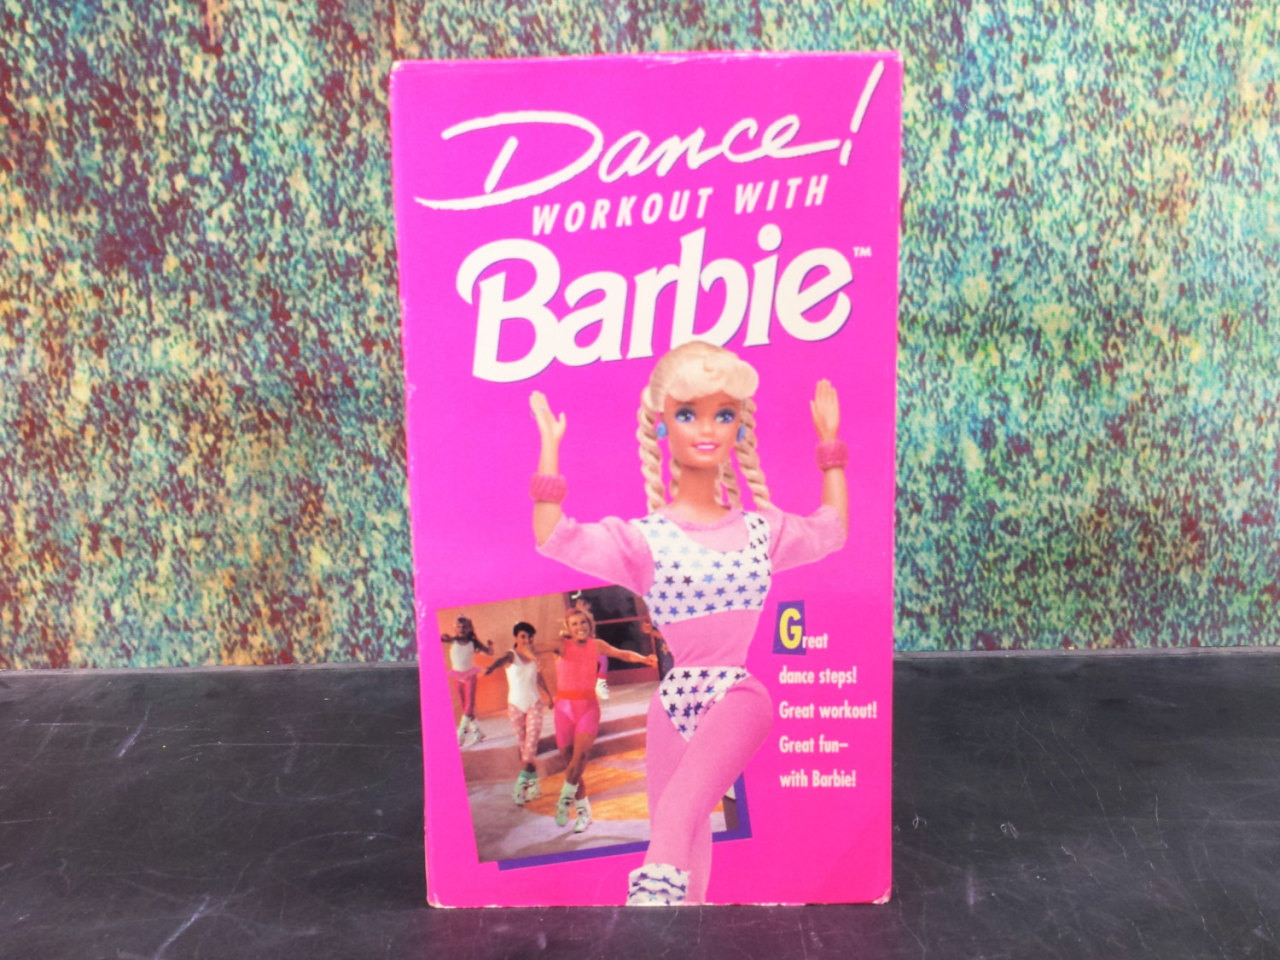 90s workout barbie